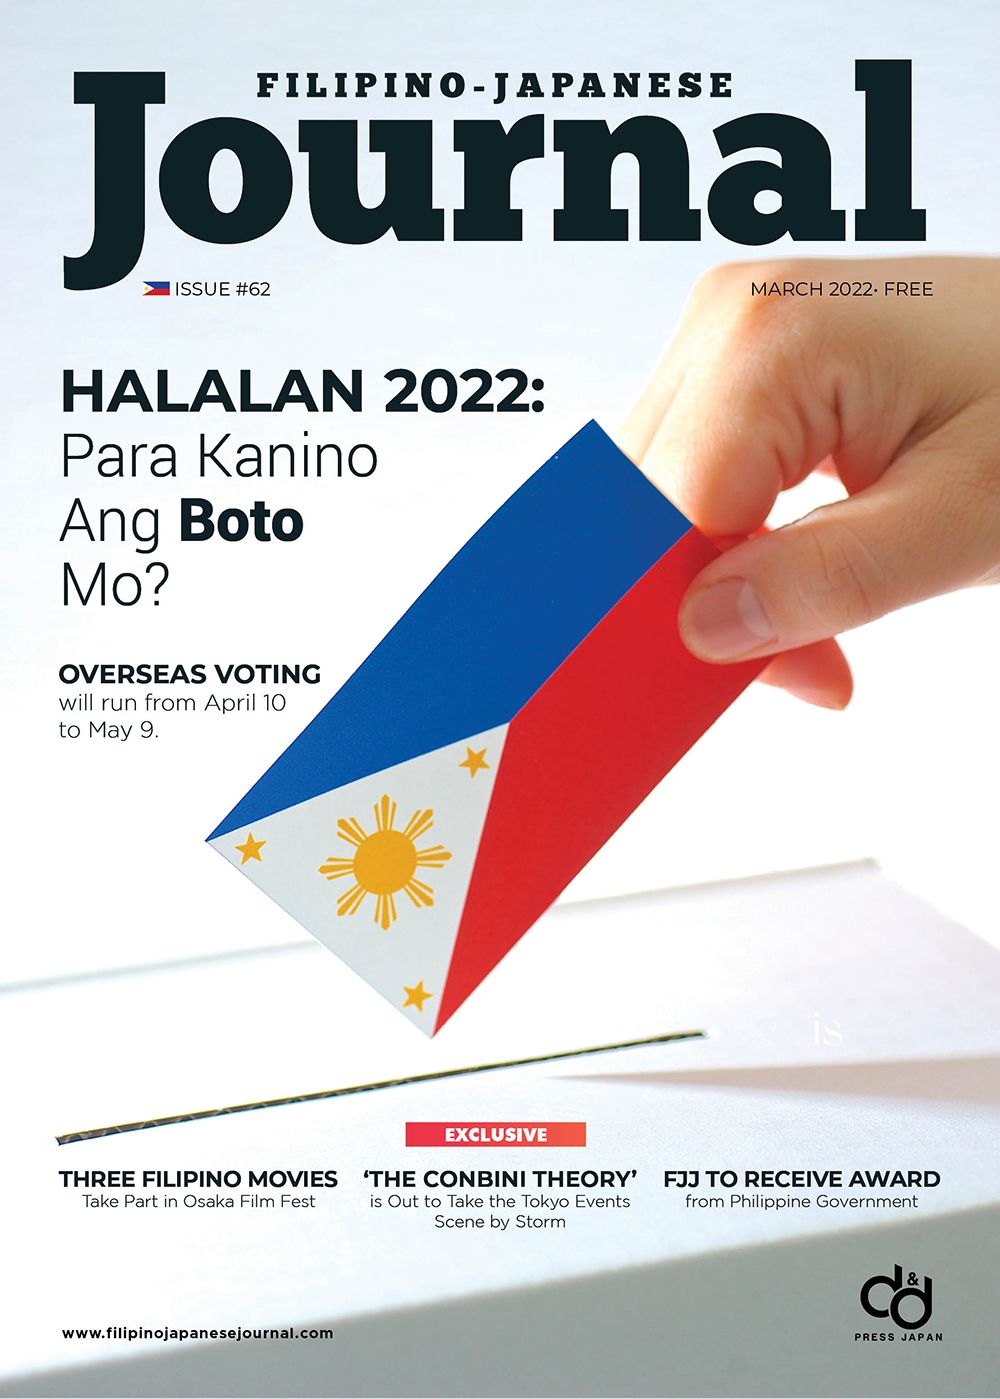 Filipino-Japanese Journal to Release Its First-Ever Election-Related Issue